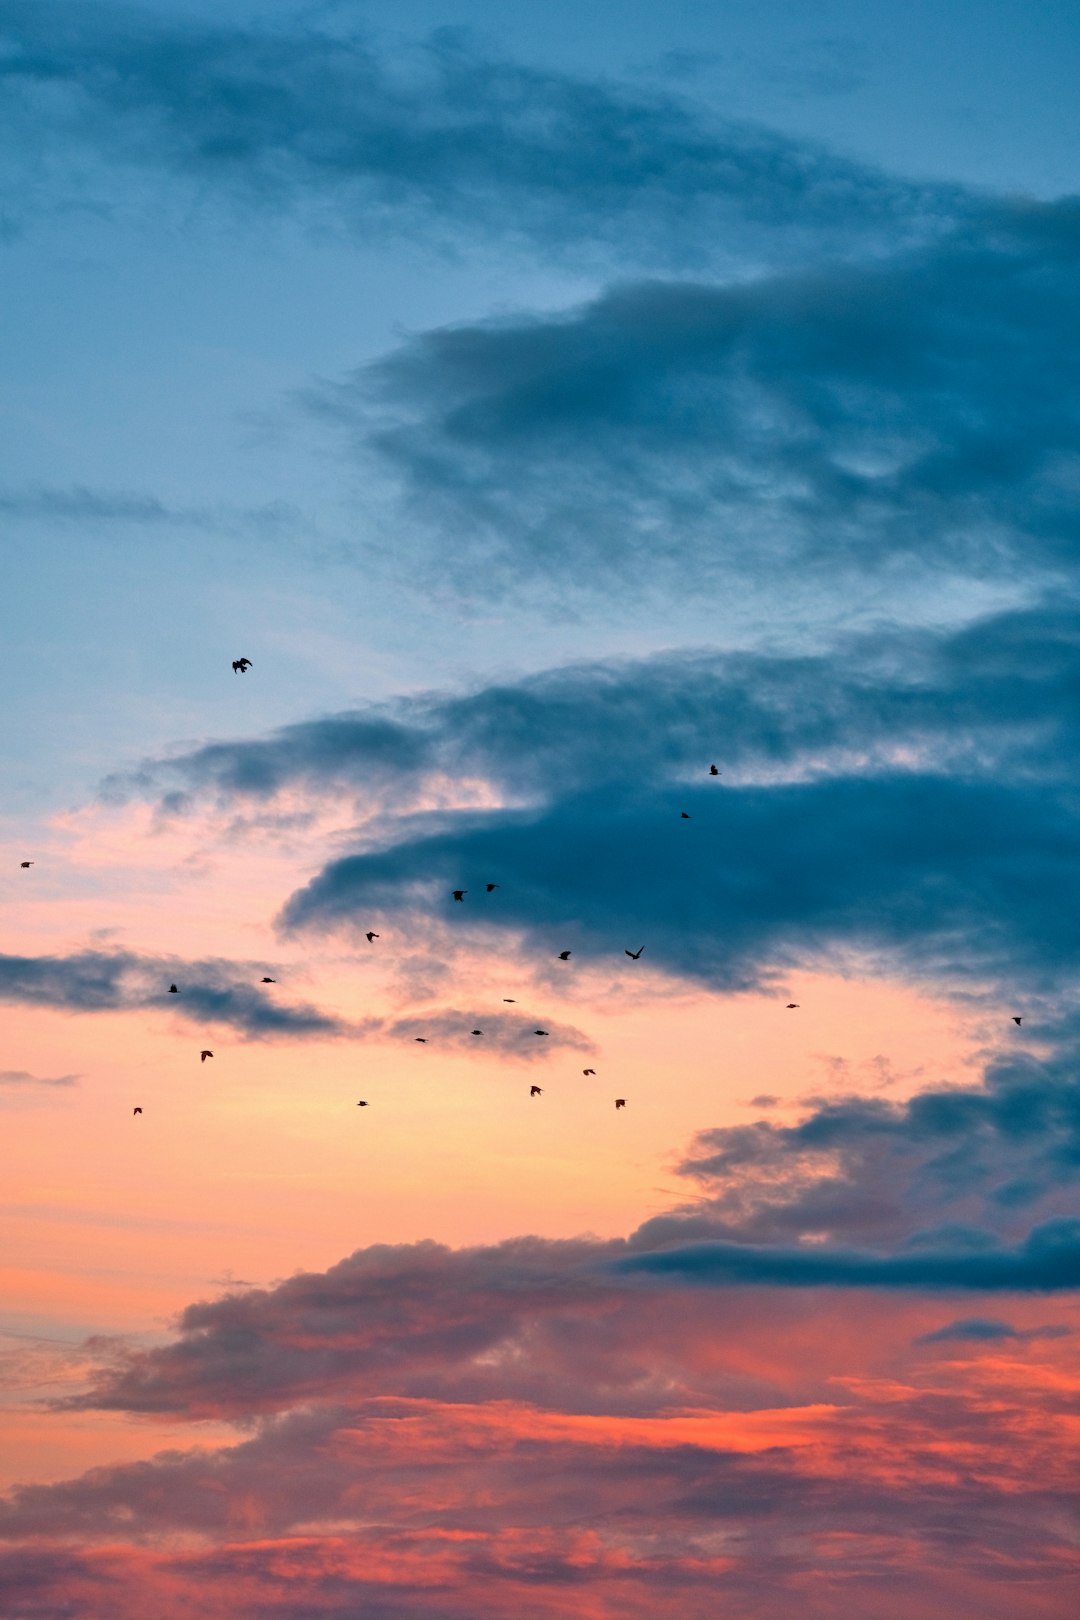 silhouette of birds flying under cloudy sky during sunset